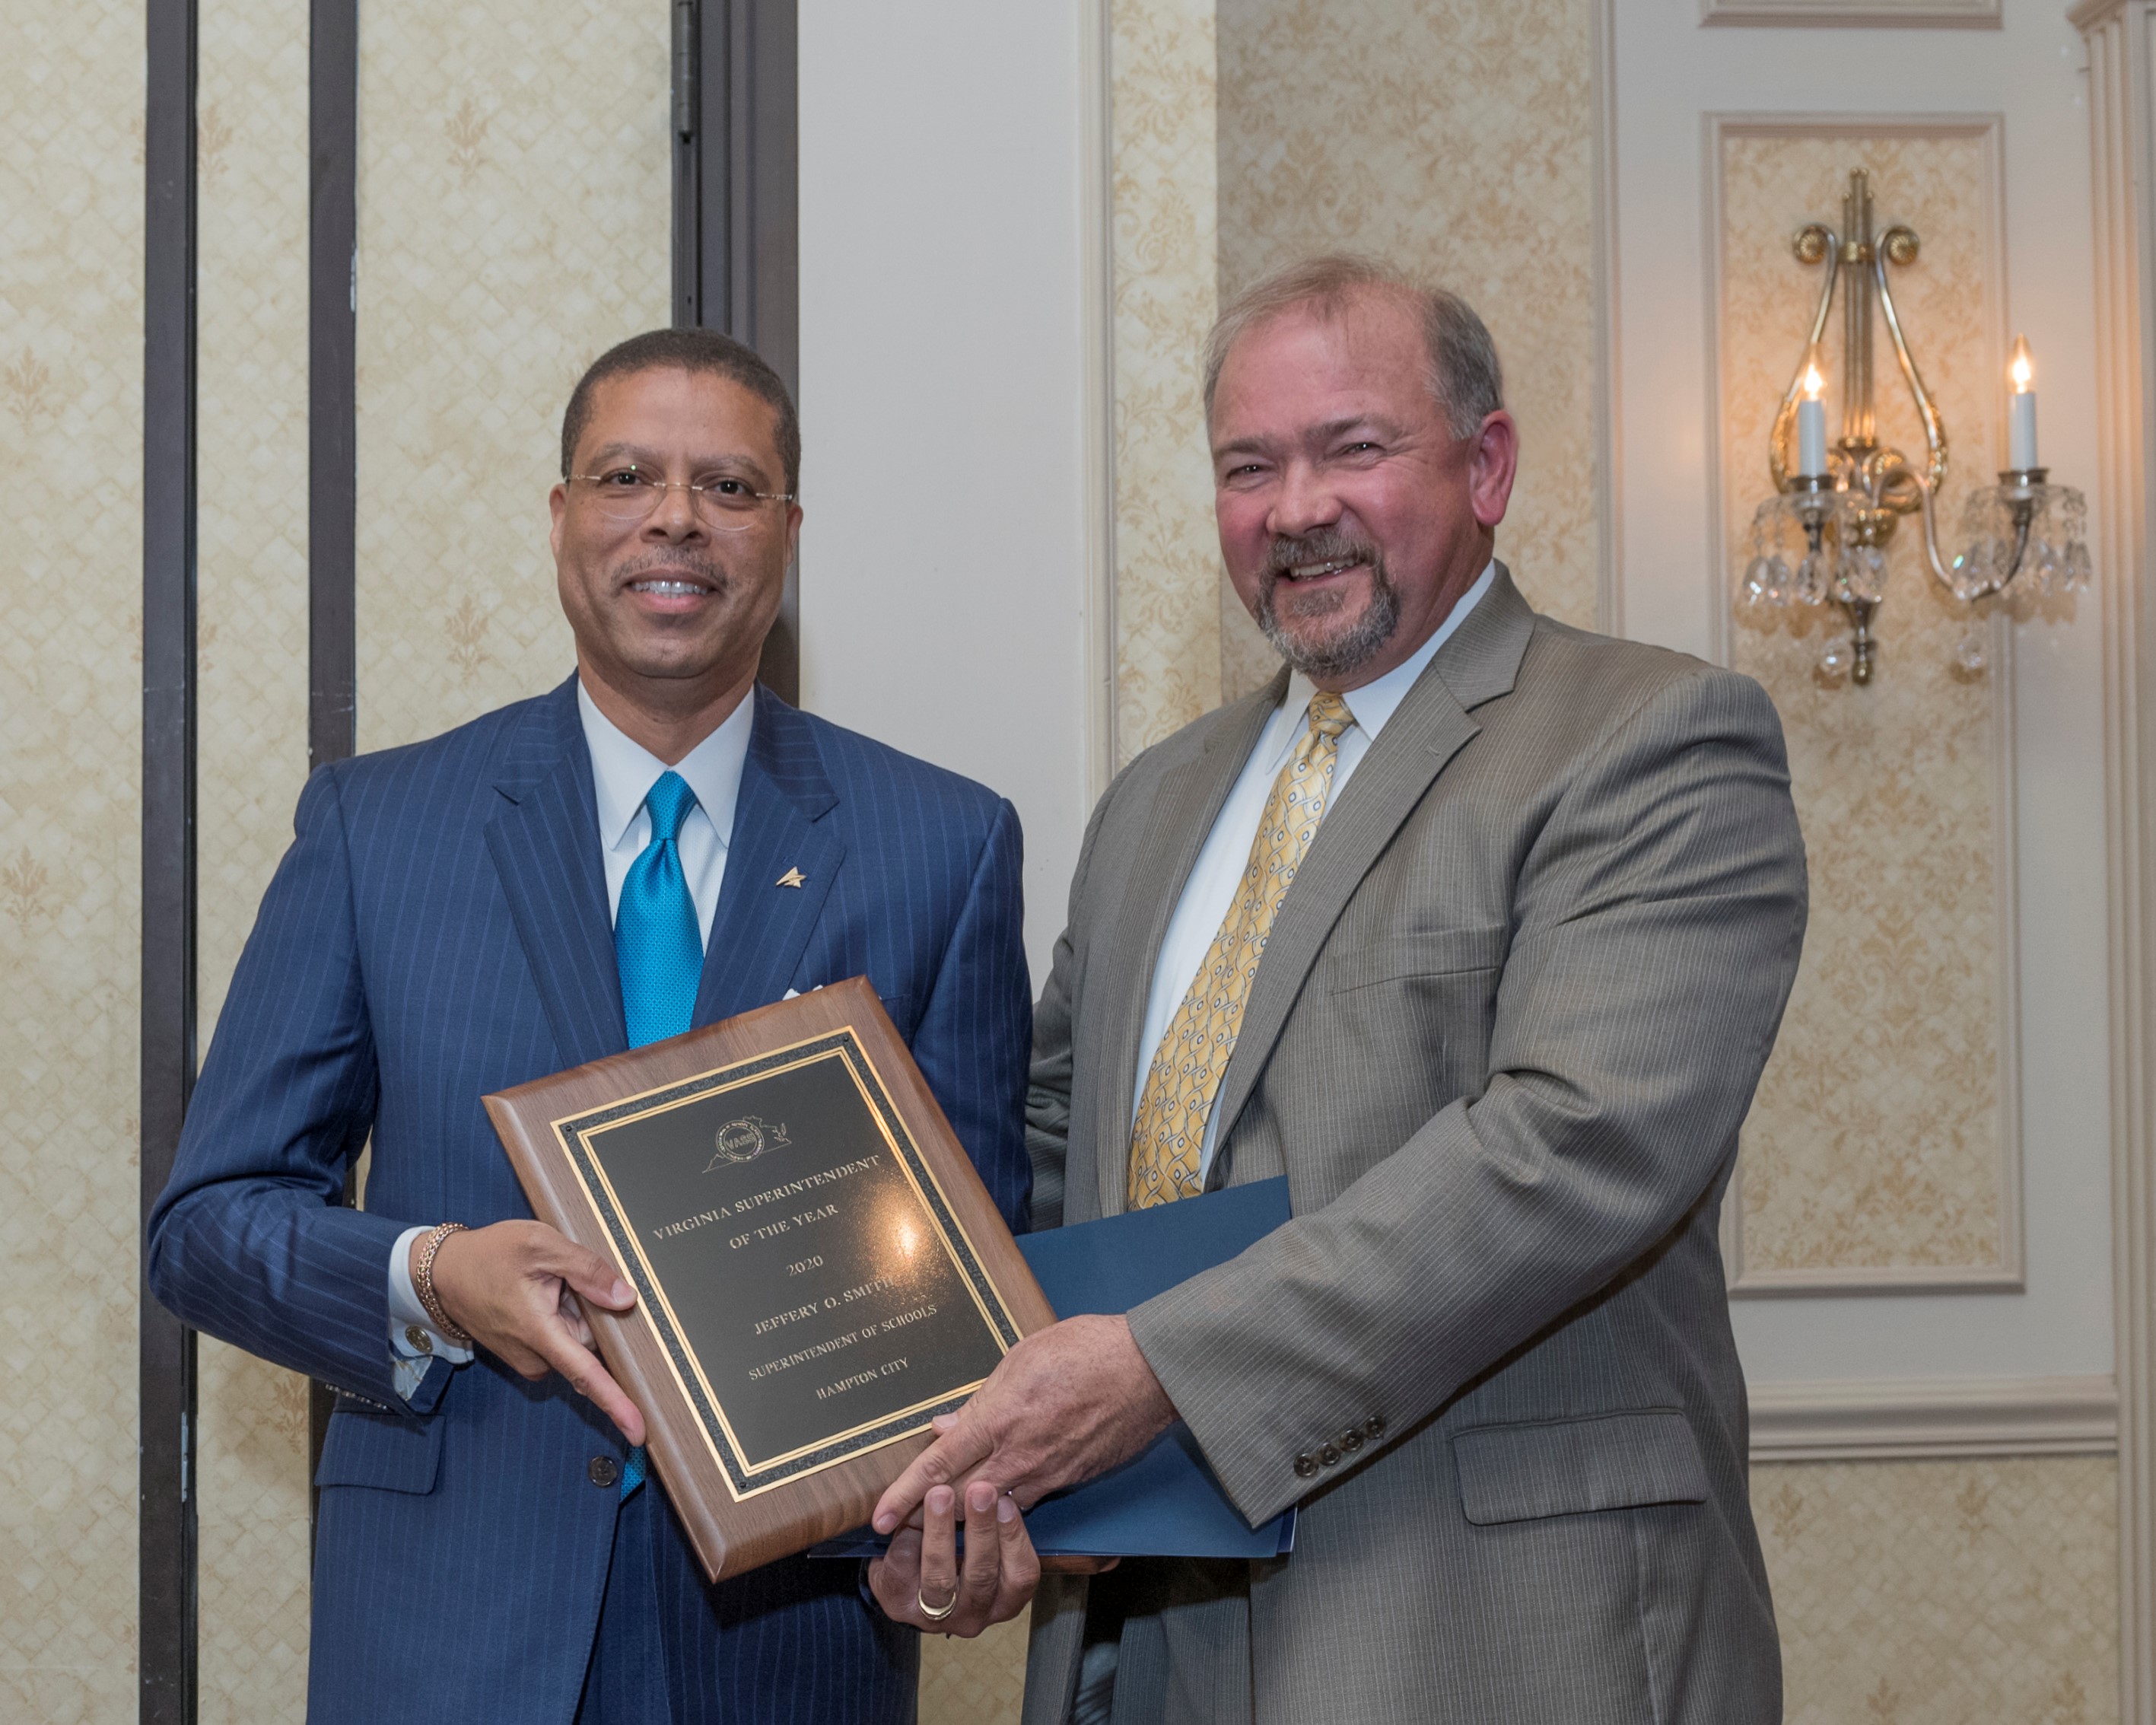 Jeffery O. Smith is the 2020 Virginia Superintendent of the Year